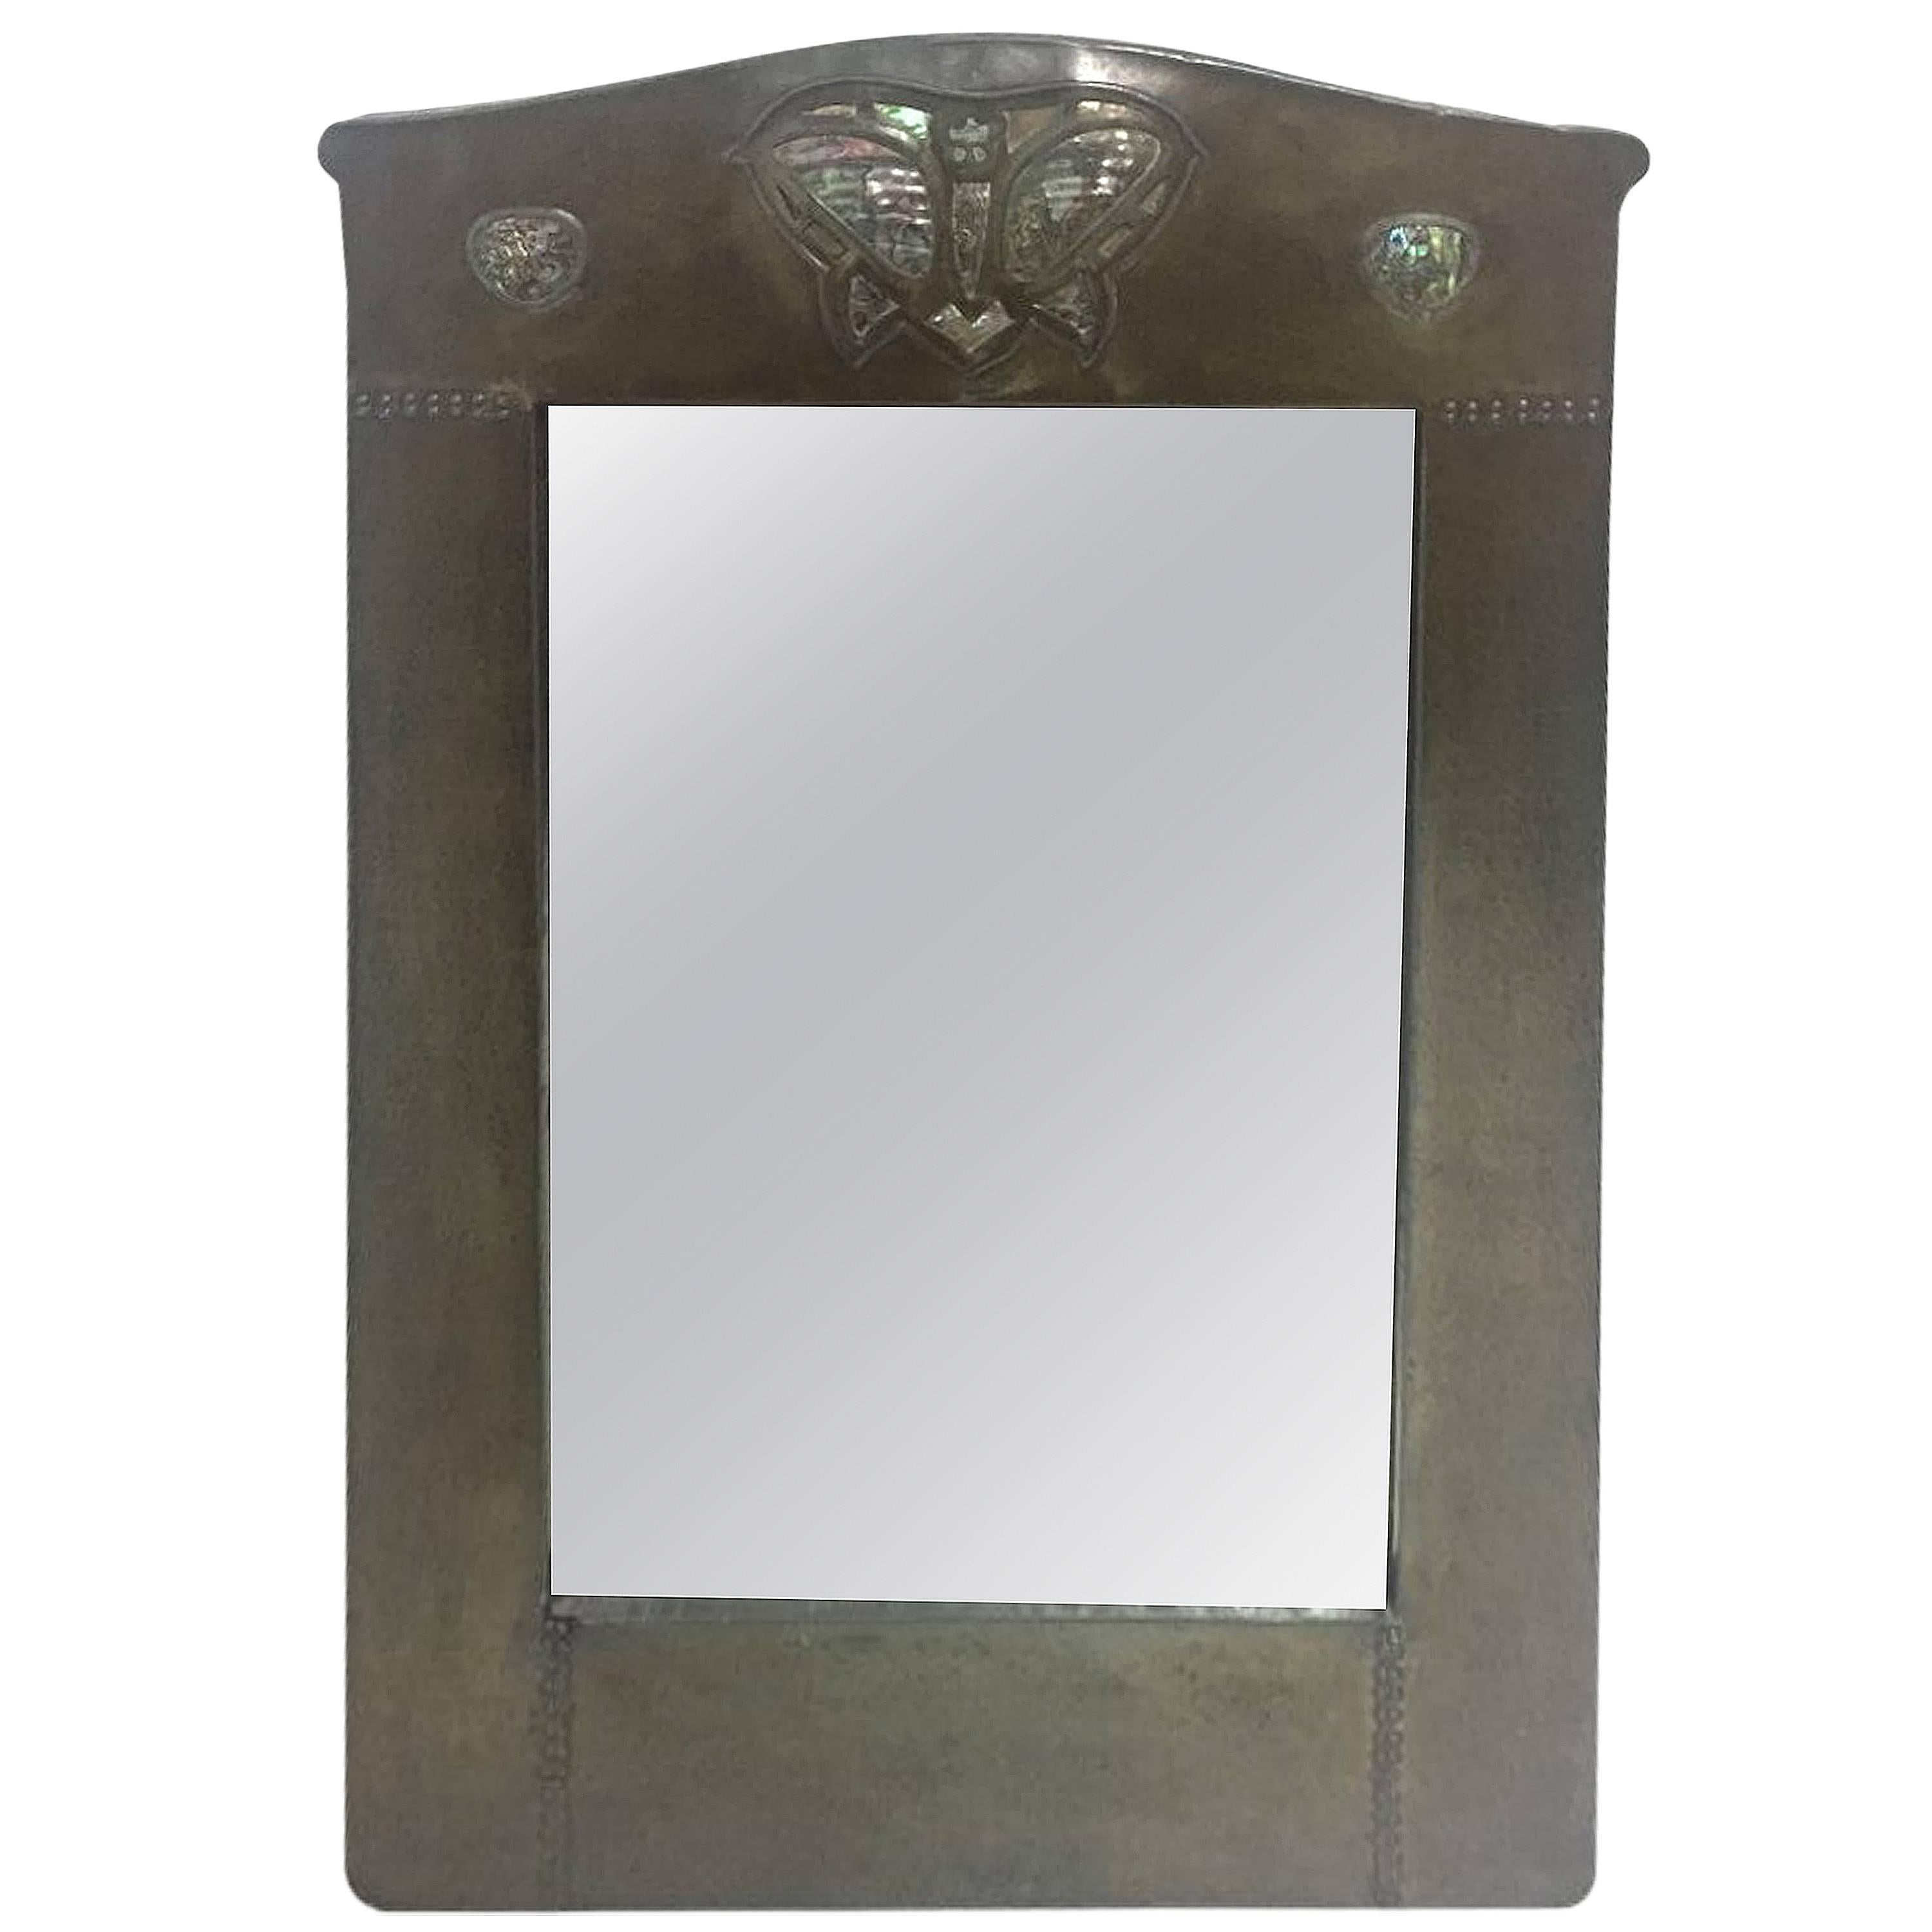 Superb Arts and Crafts Mirror by Liberty and Co.